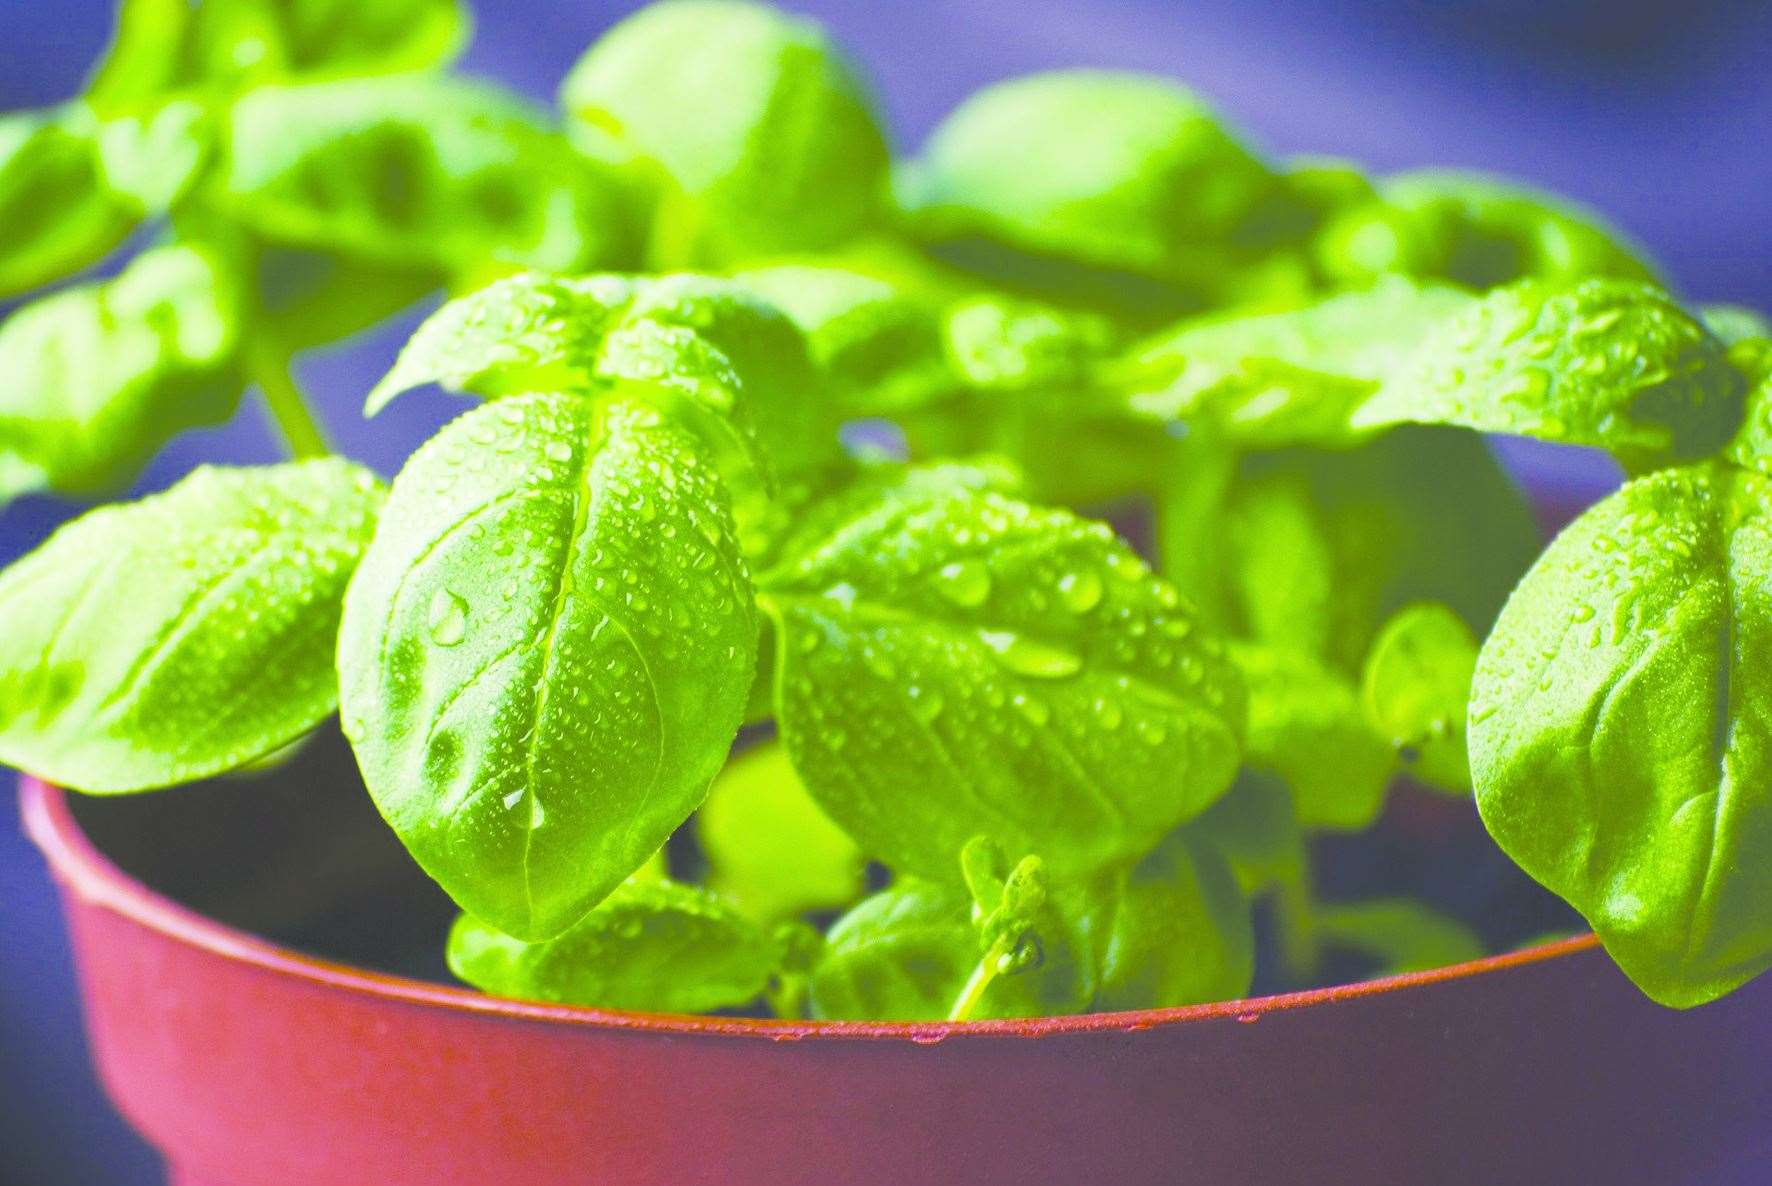 Budding chefs can put those mint plants to good use and double them up as spider repellents